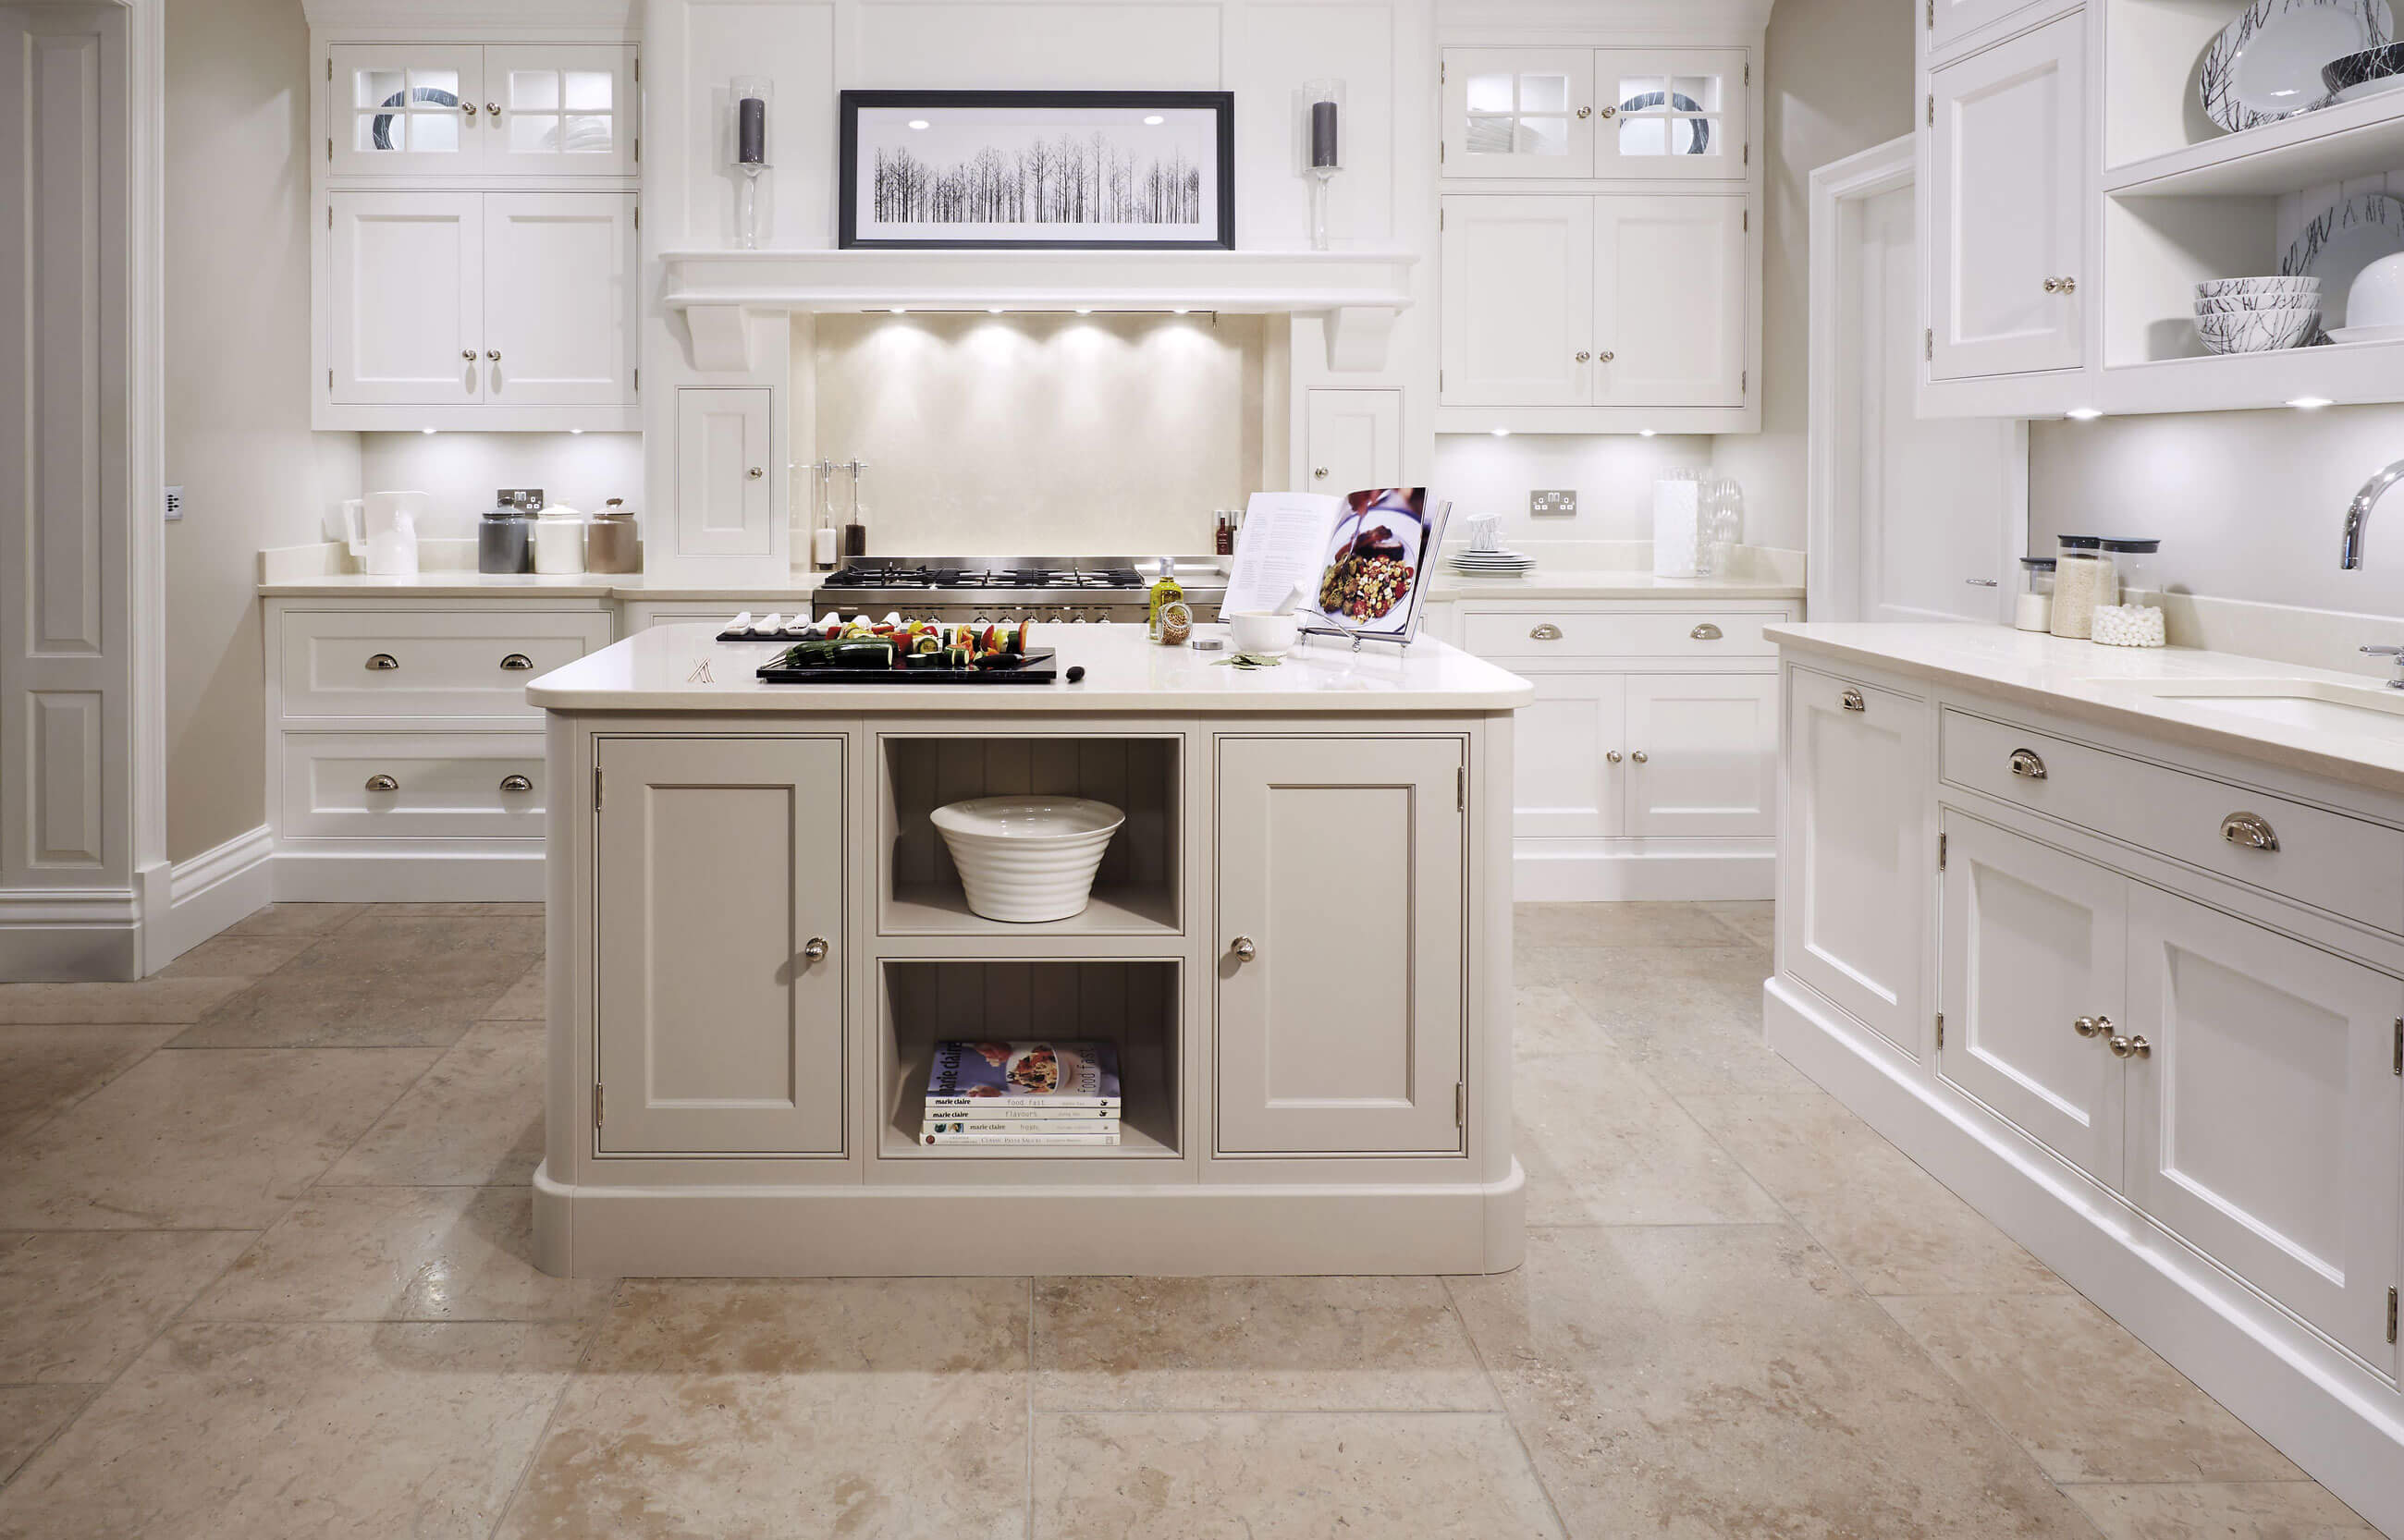 kitchen painted howley tom cream classic kitchens leamington spa royal tomhowley learn